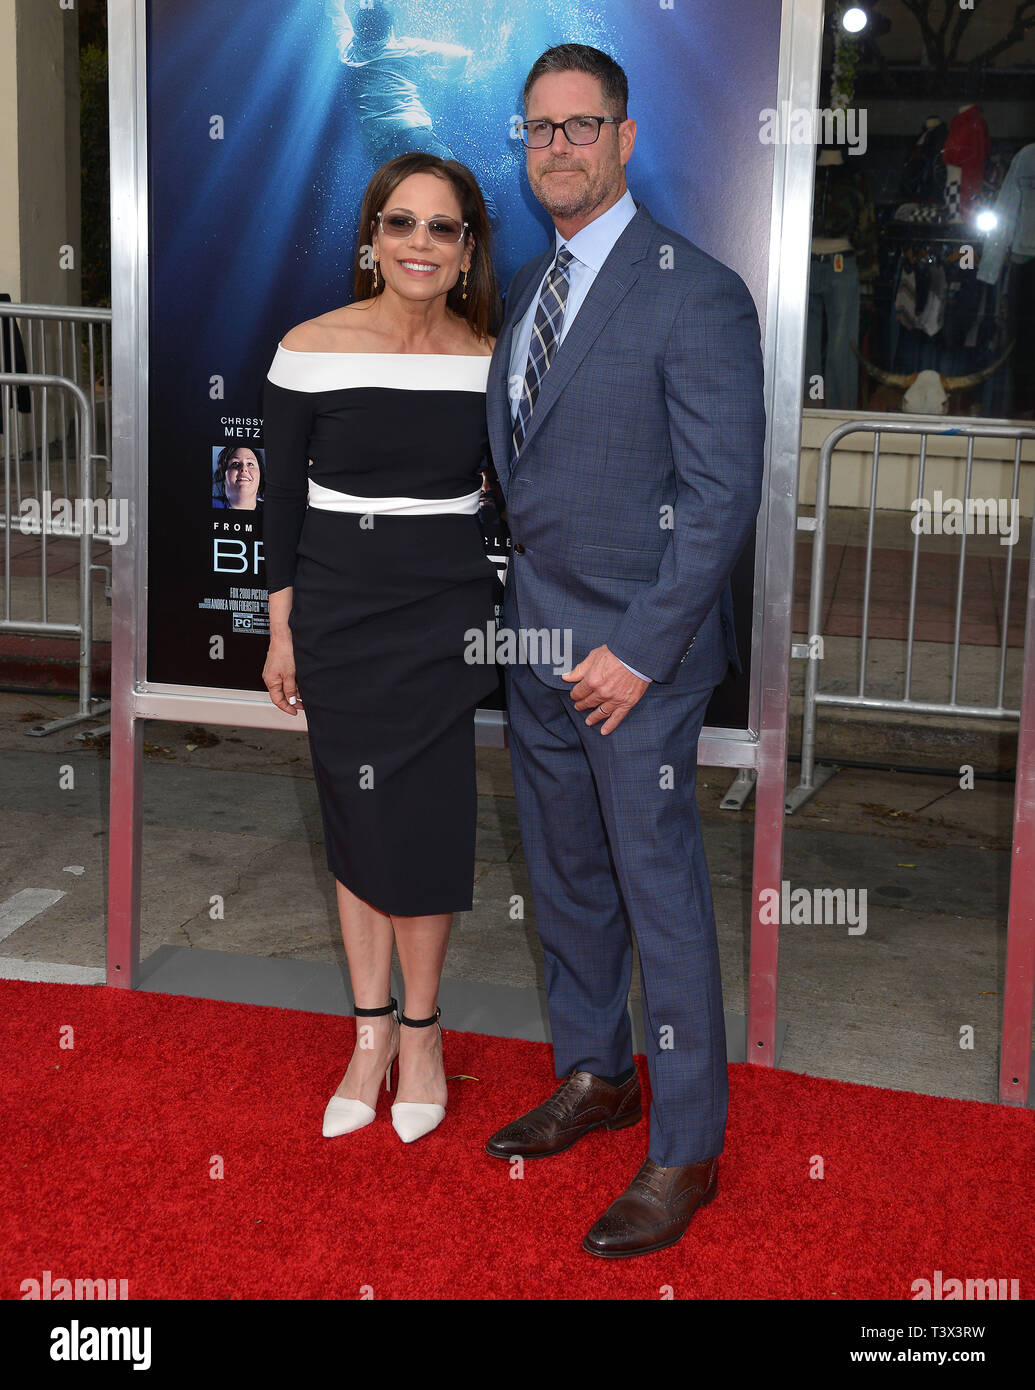 Los Angeles, USA. 11th Apr, 2019. Roxann Dawson - director and husband attend the premiere of 20th Century Fox's 'Breakthrough' at Westwood Regency Theater on April 11, 2019 in Los Angeles, California. Credit: Tsuni/USA/Alamy Live News Stock Photo